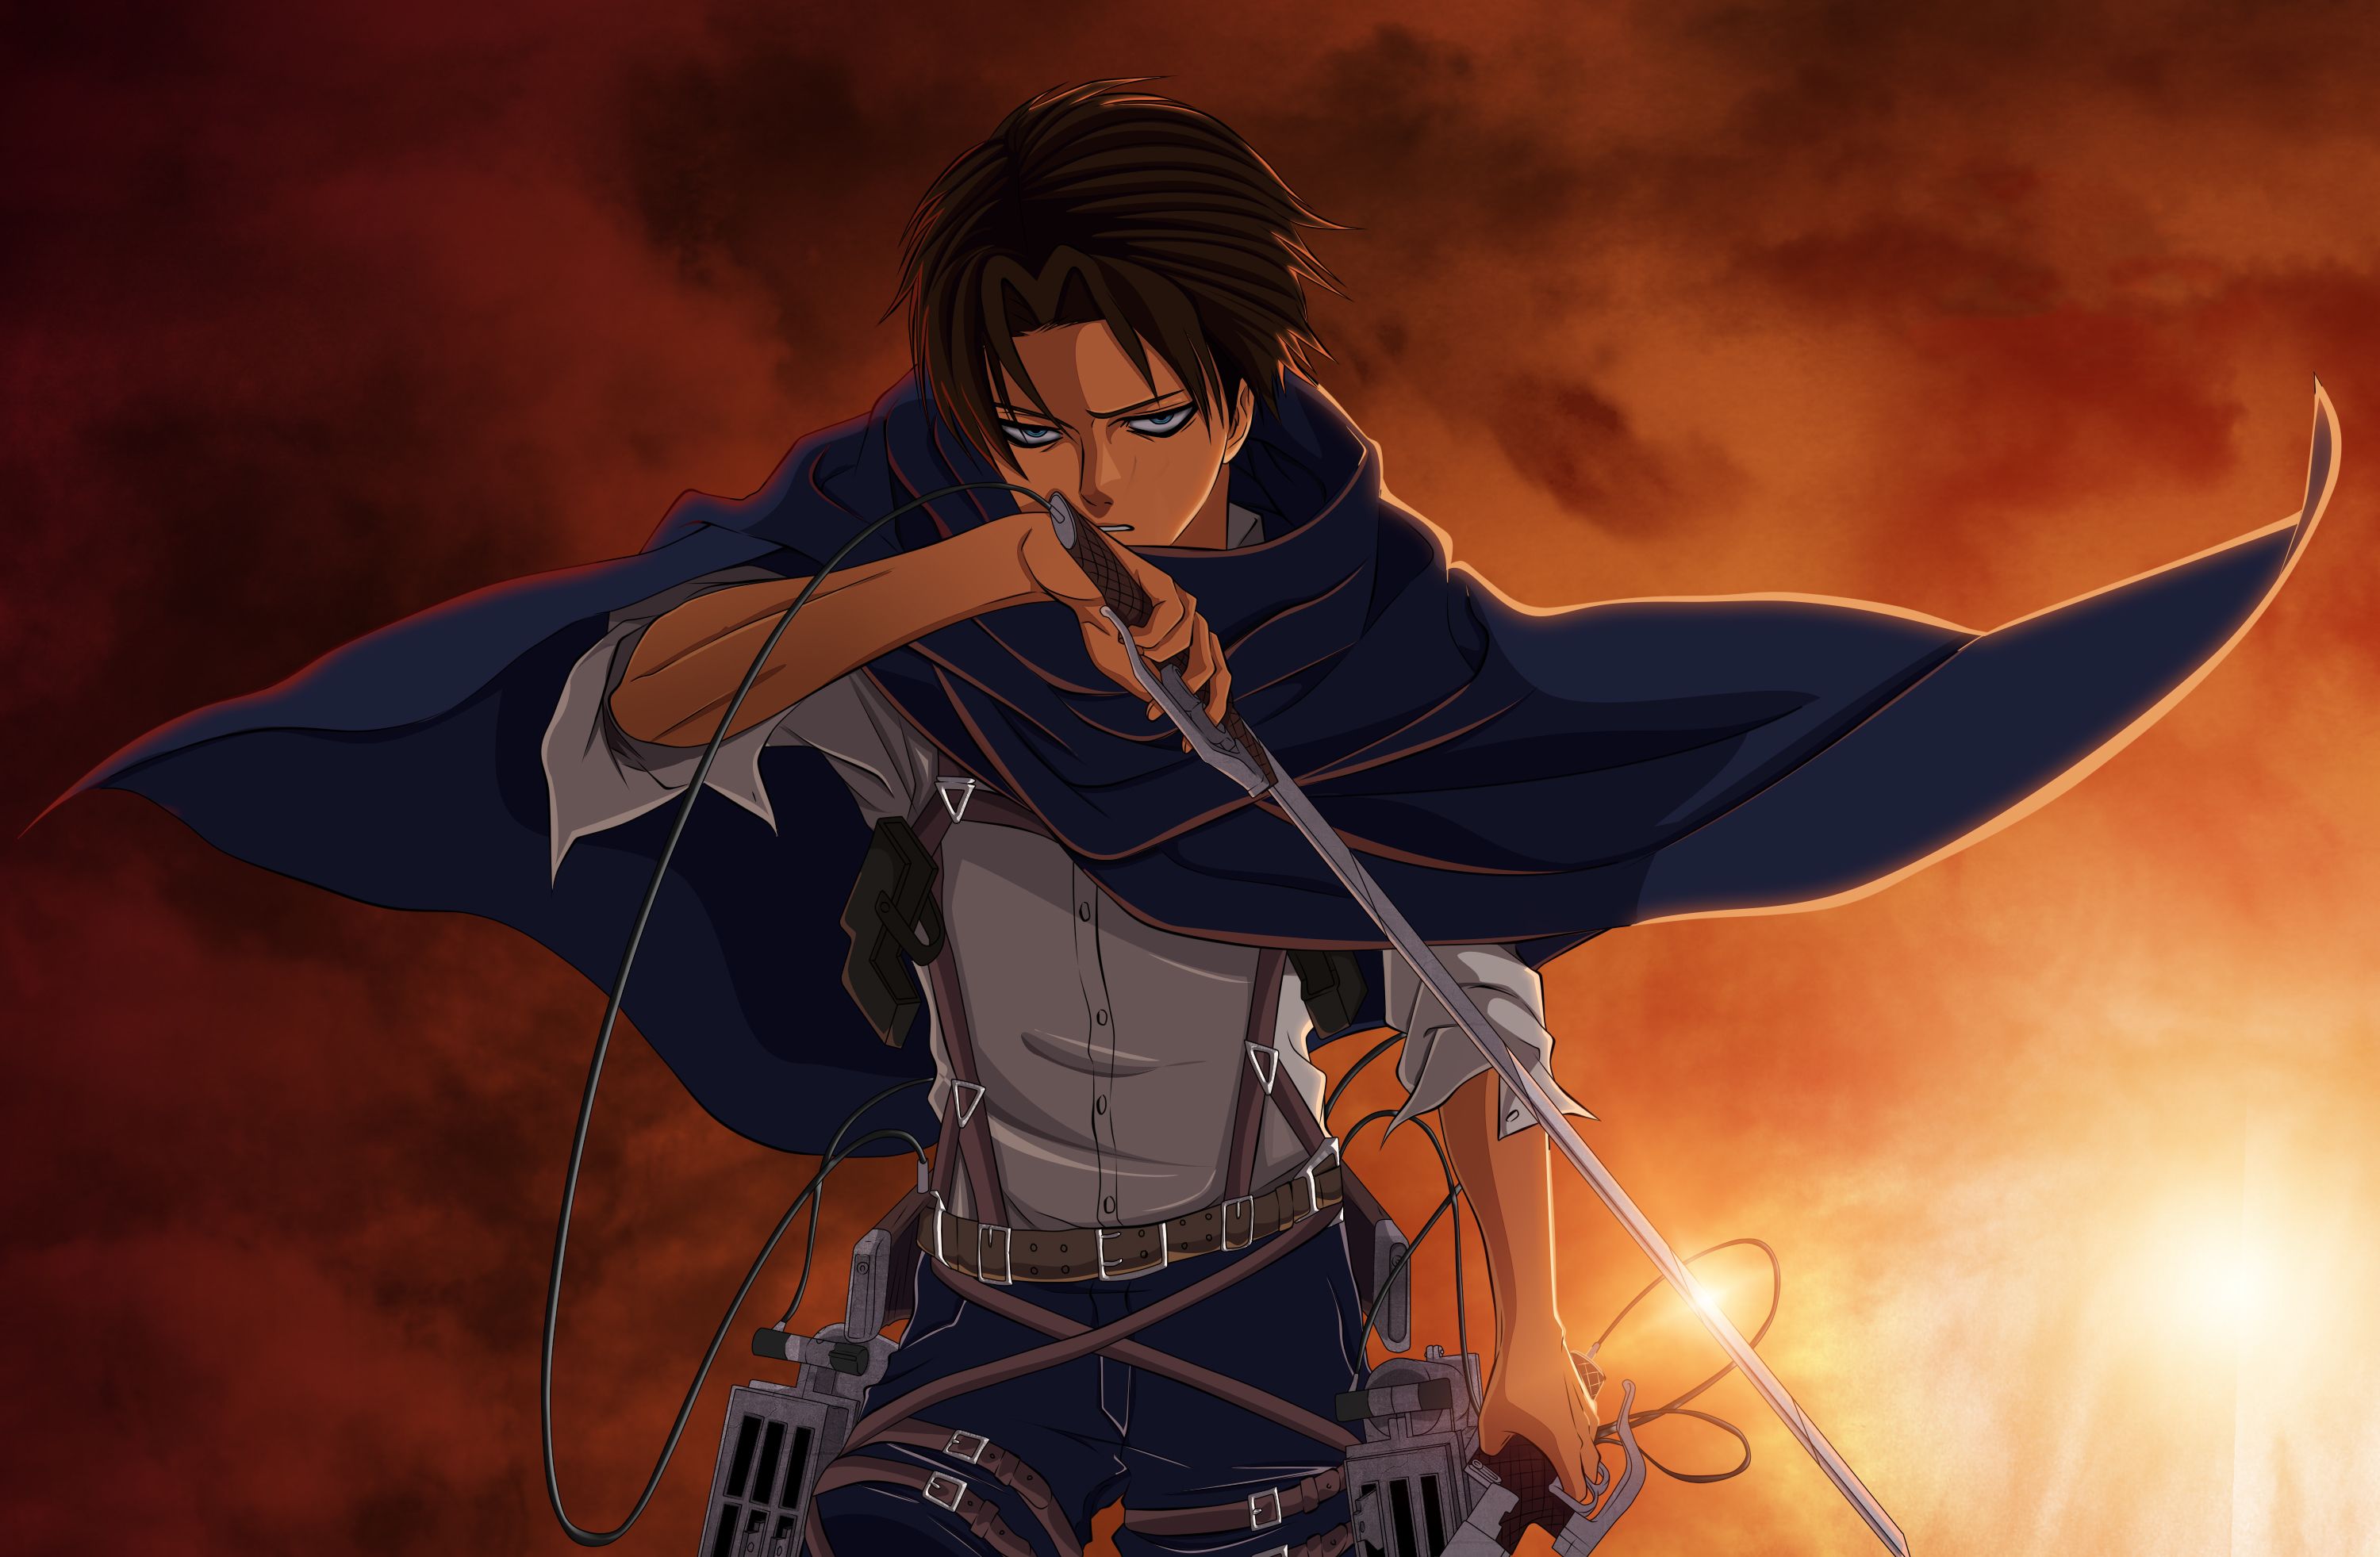 Details 72+ attack on titan levi wallpaper latest - in.cdgdbentre